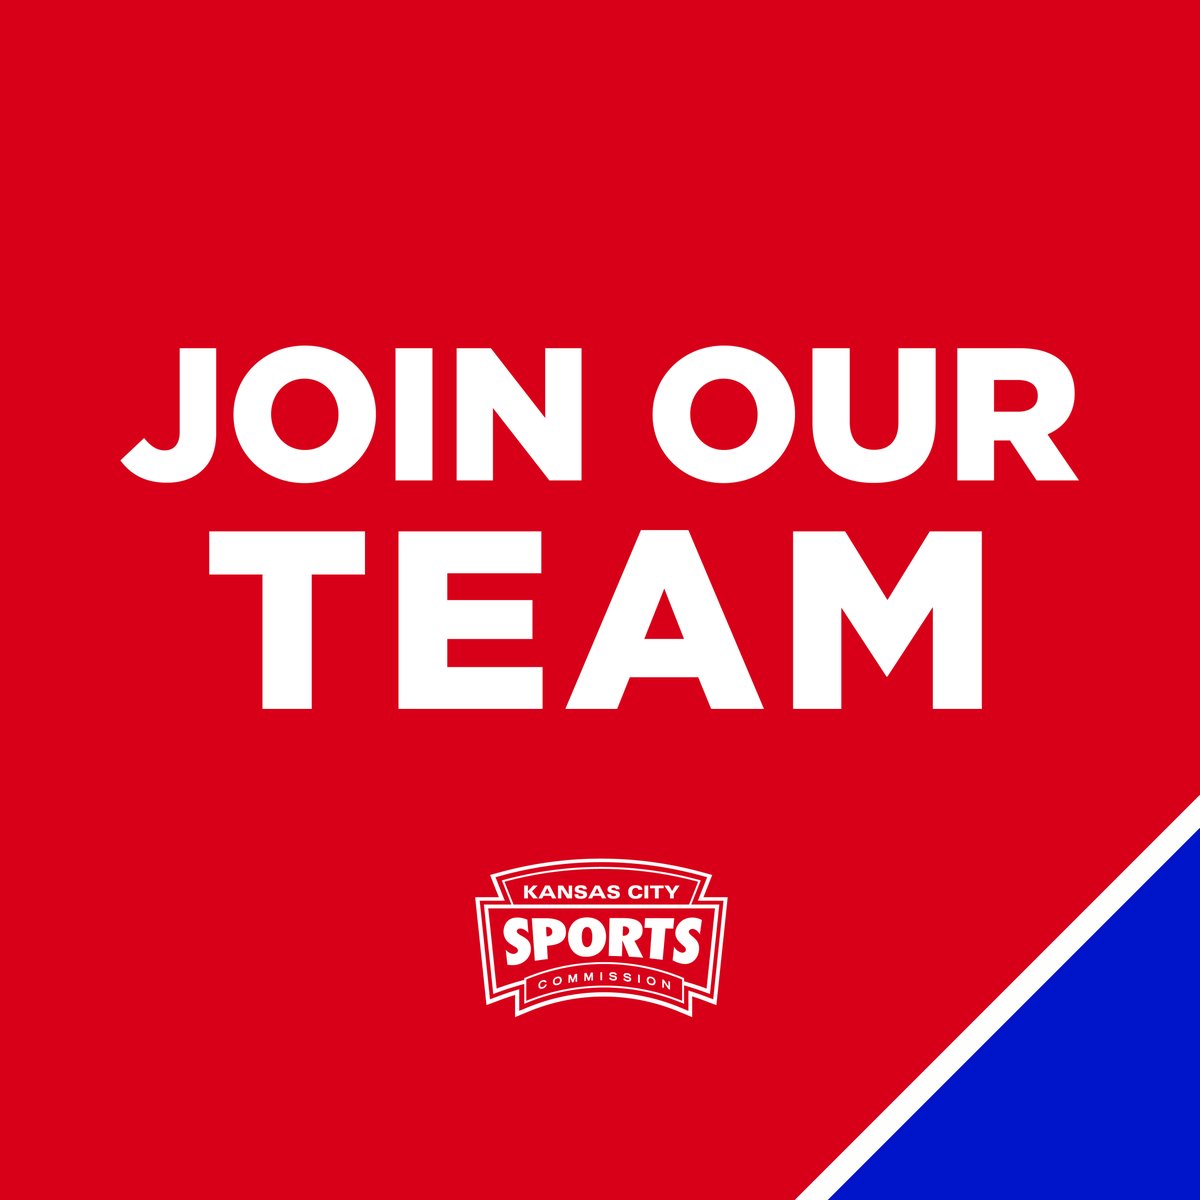 We're hiring! Join us in making a better Kansas City through sports. Open positions: 🏆 Executive Assistant to the Chief Executive Officer/President (Closes 1/17) 🏆 Manager, Events (Closes 1/21) For more details and how to apply, visit sportkc.org/jobs.